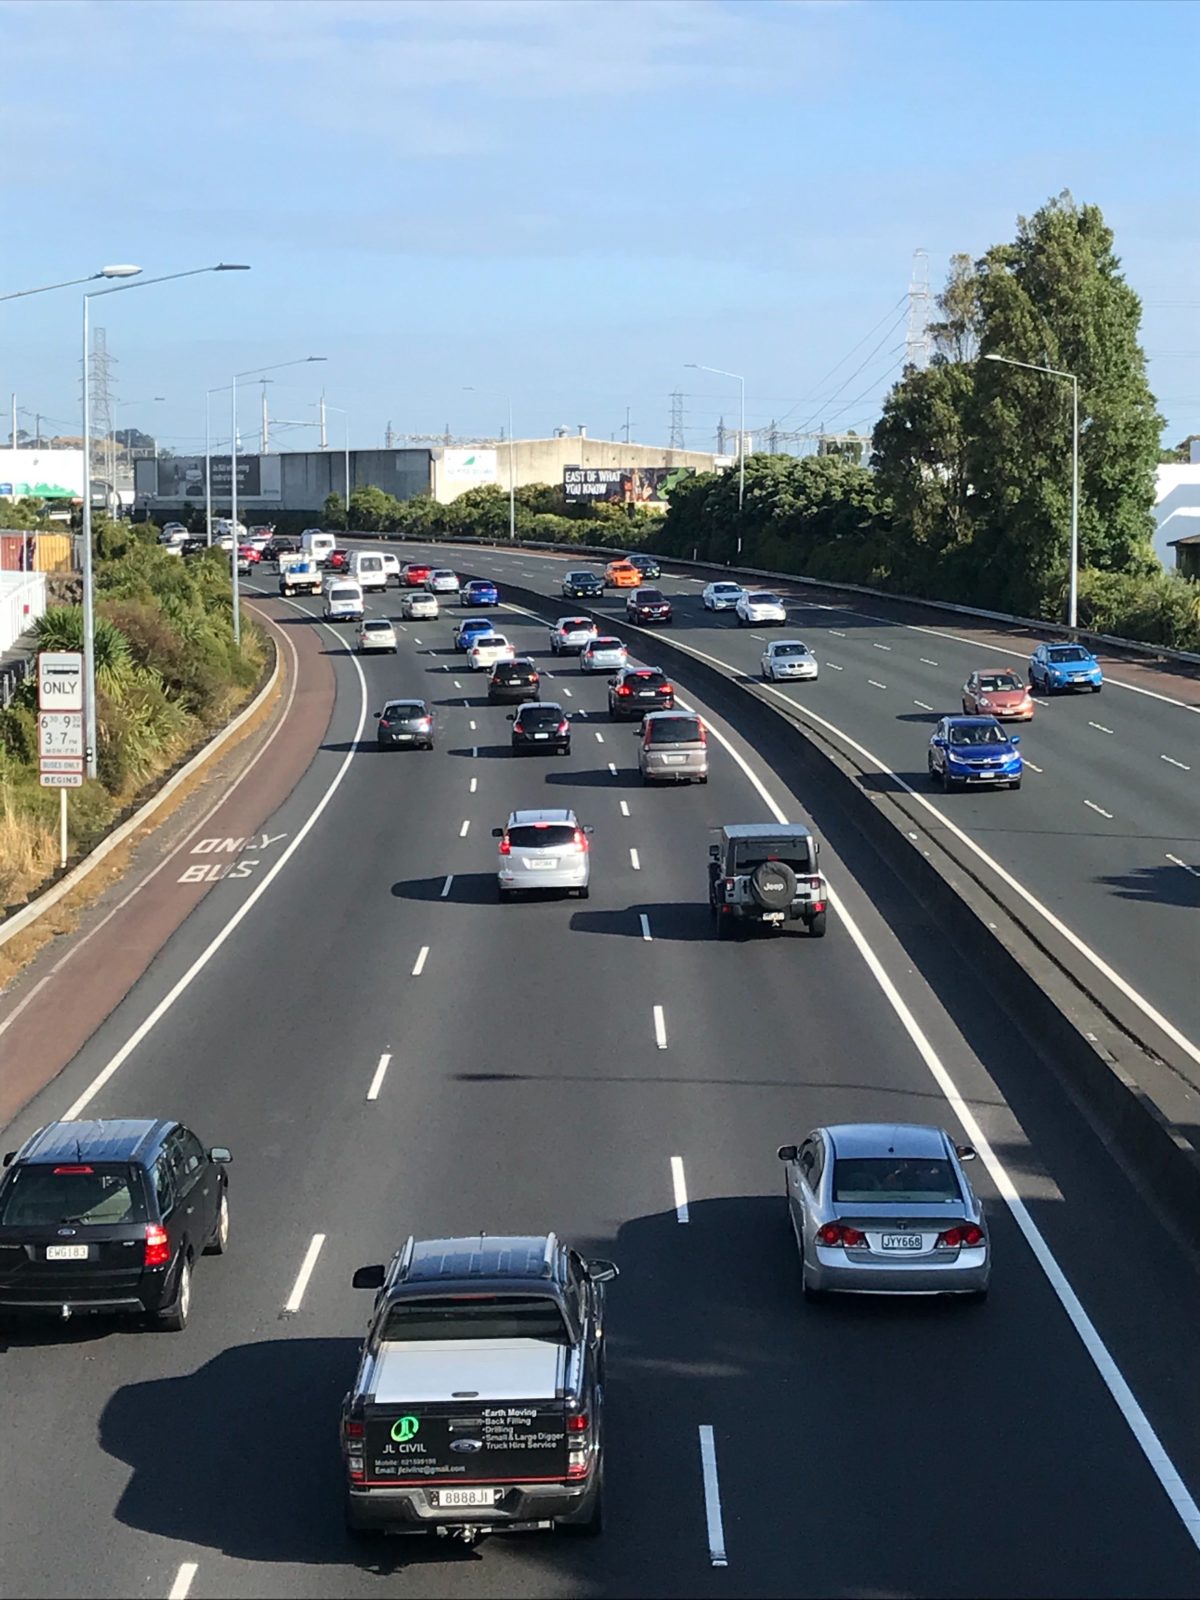 Unnecessary traffic on Auckland road